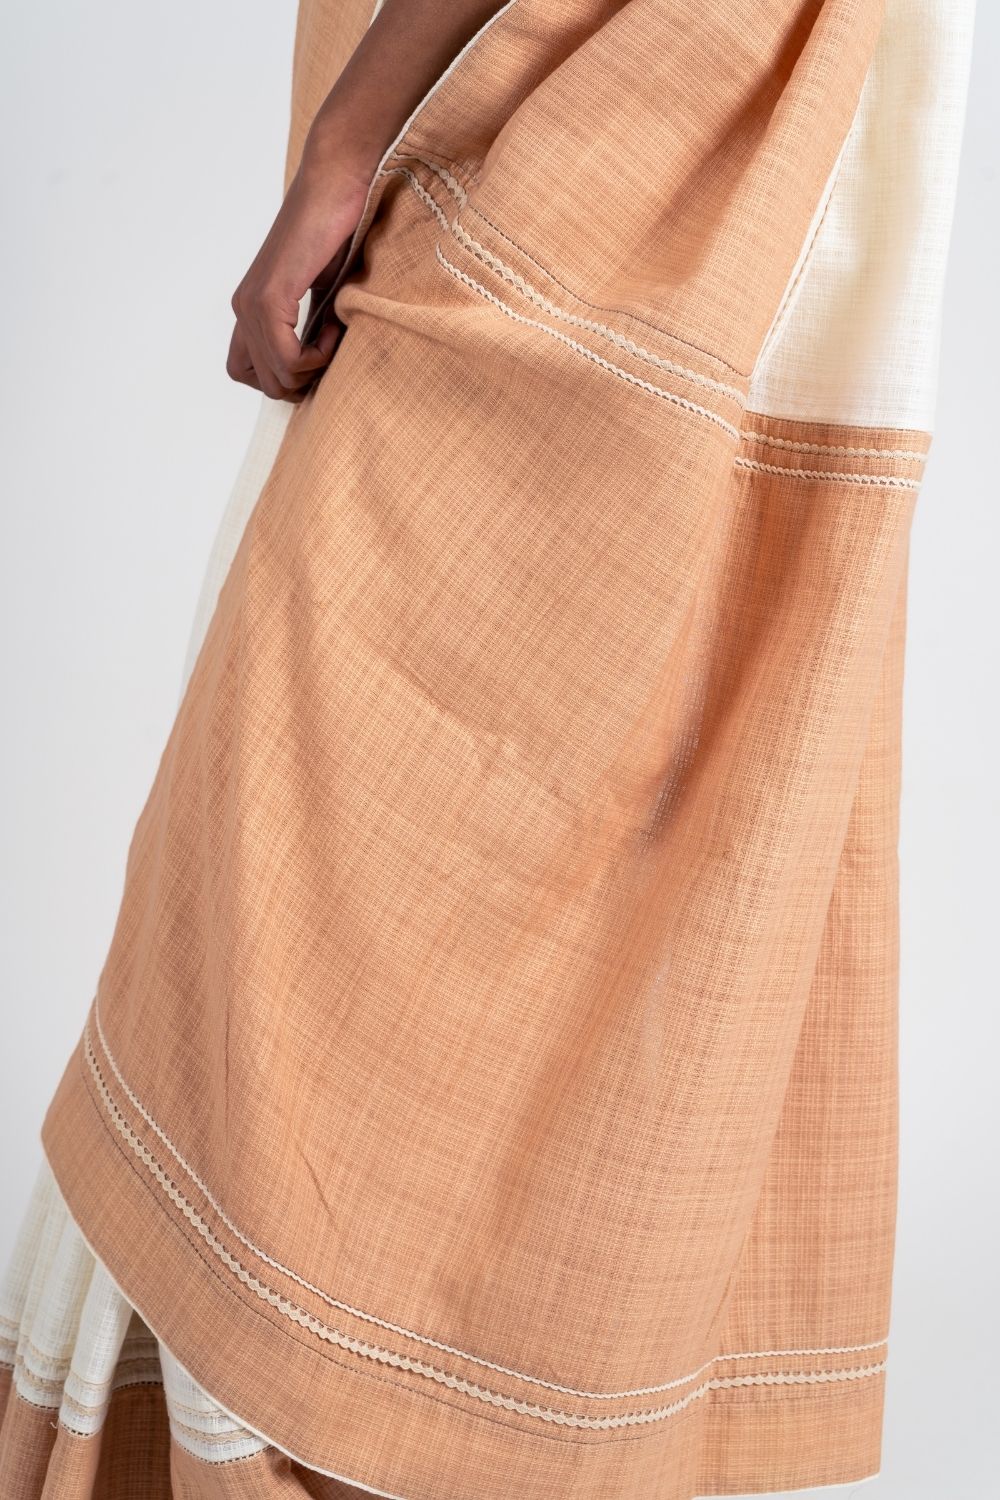 Ivory Cotton Saree at Kamakhyaa by Ahmev. This item is Casual Wear, For Mother, Handloom Cotton, Indian Wear, July Sale, July Sale 2023, Multicolor, Natural, Relaxed Fit, Sarees, Textured, Womenswear